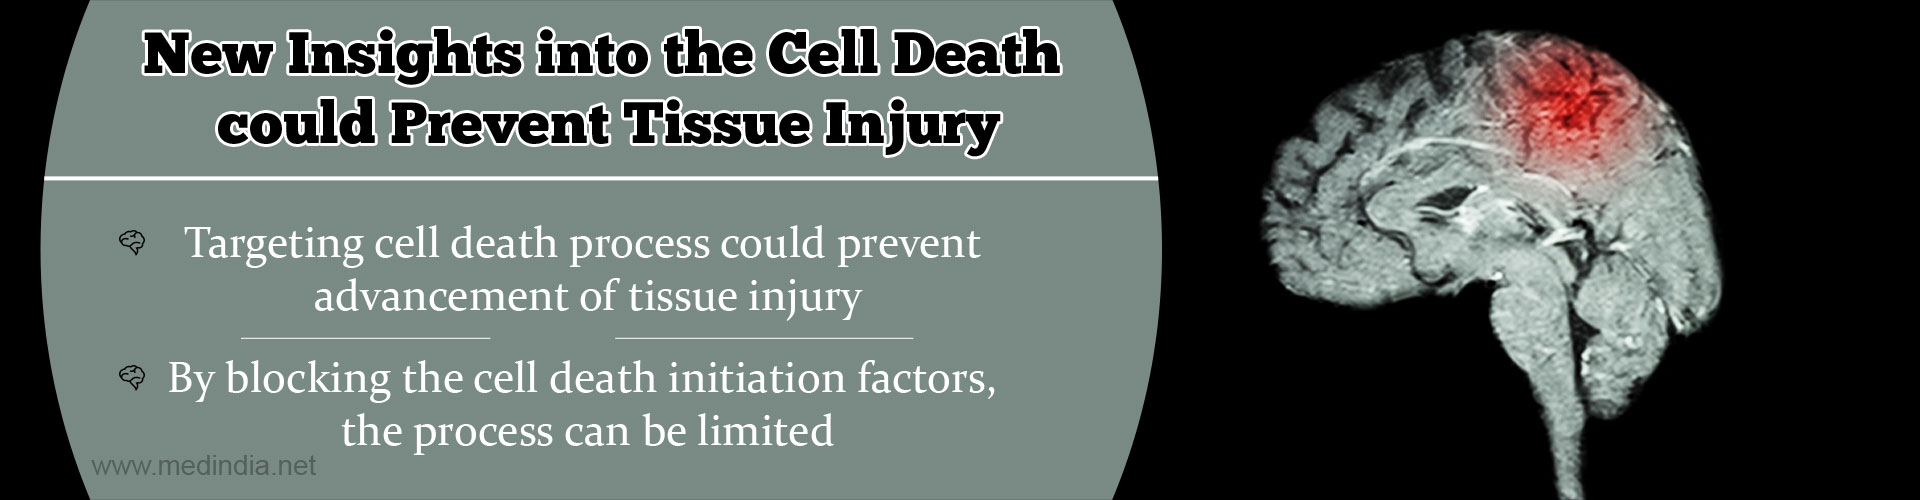 New Insights into the Cell Death could Prevent Tissue Injury
- Targeting cell death process could prevent advancement of tissue injury
- By blocking the cell death initiation factors, the process can be limited